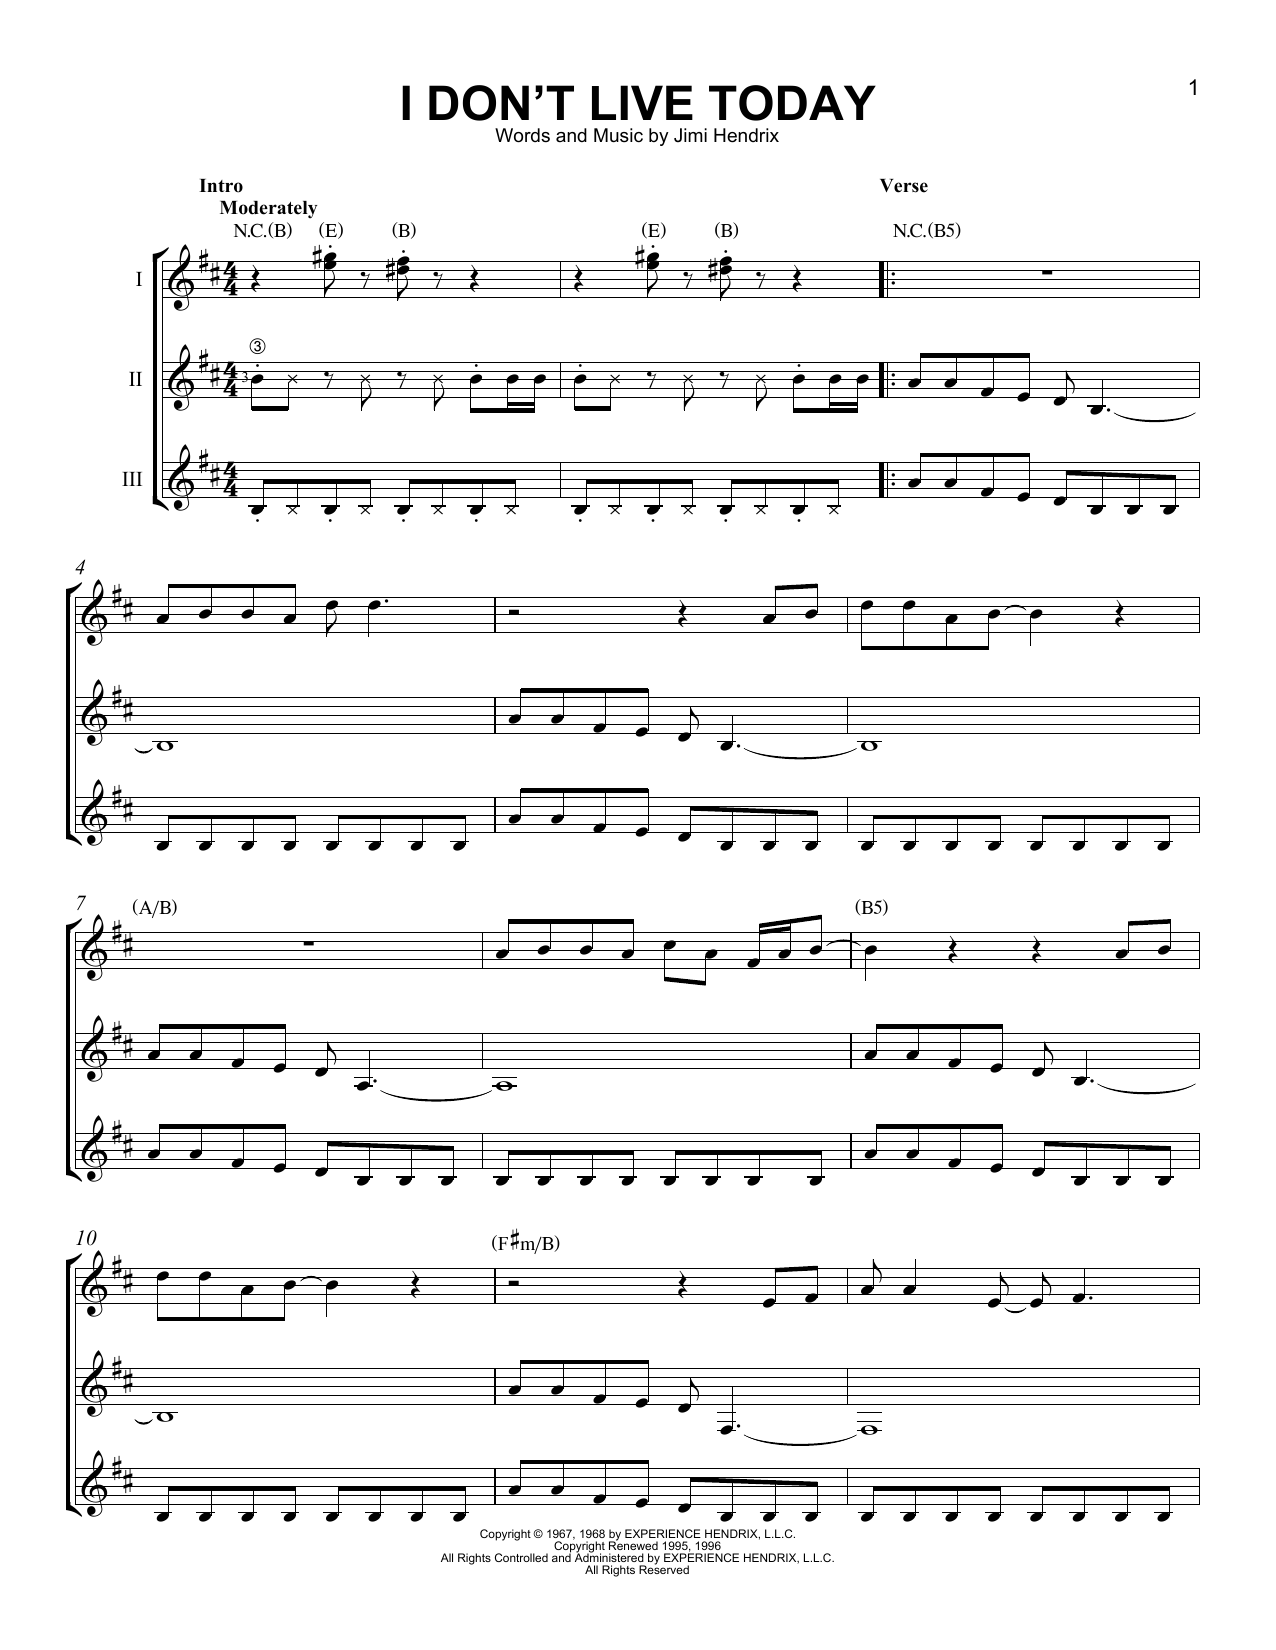 Download Jimi Hendrix I Don't Live Today Sheet Music